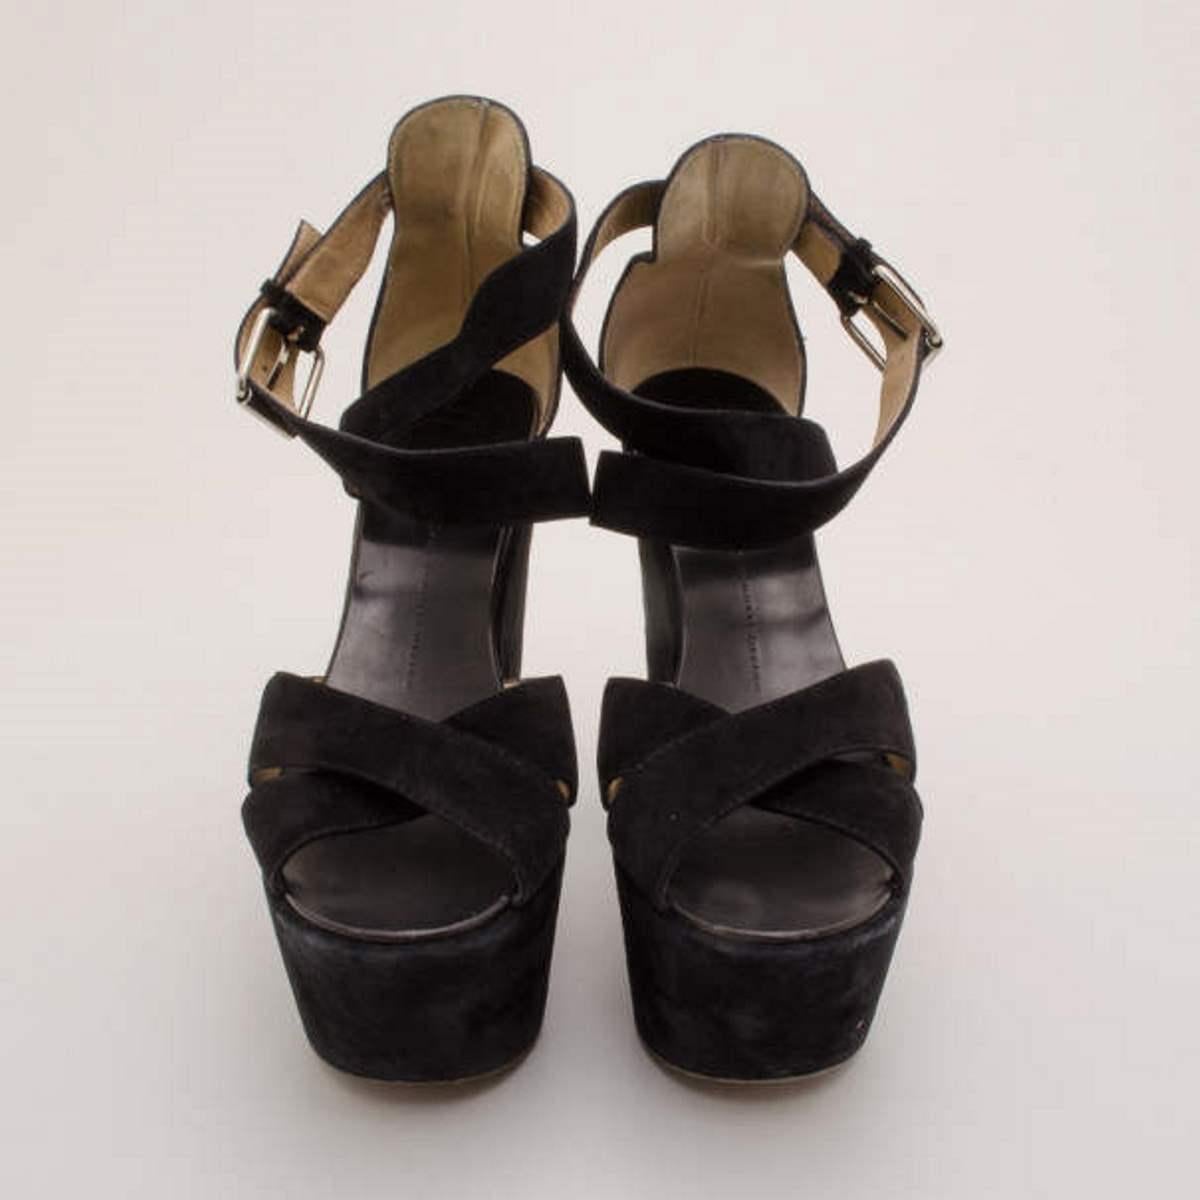 Receive plenty of attention when you rock these sky high suede platform sandals from Giuseppe Zanotti. These size 41 comfortable stacked platform sandals are made from black suede that feature strappy fronts and silver ankle closures. The interior